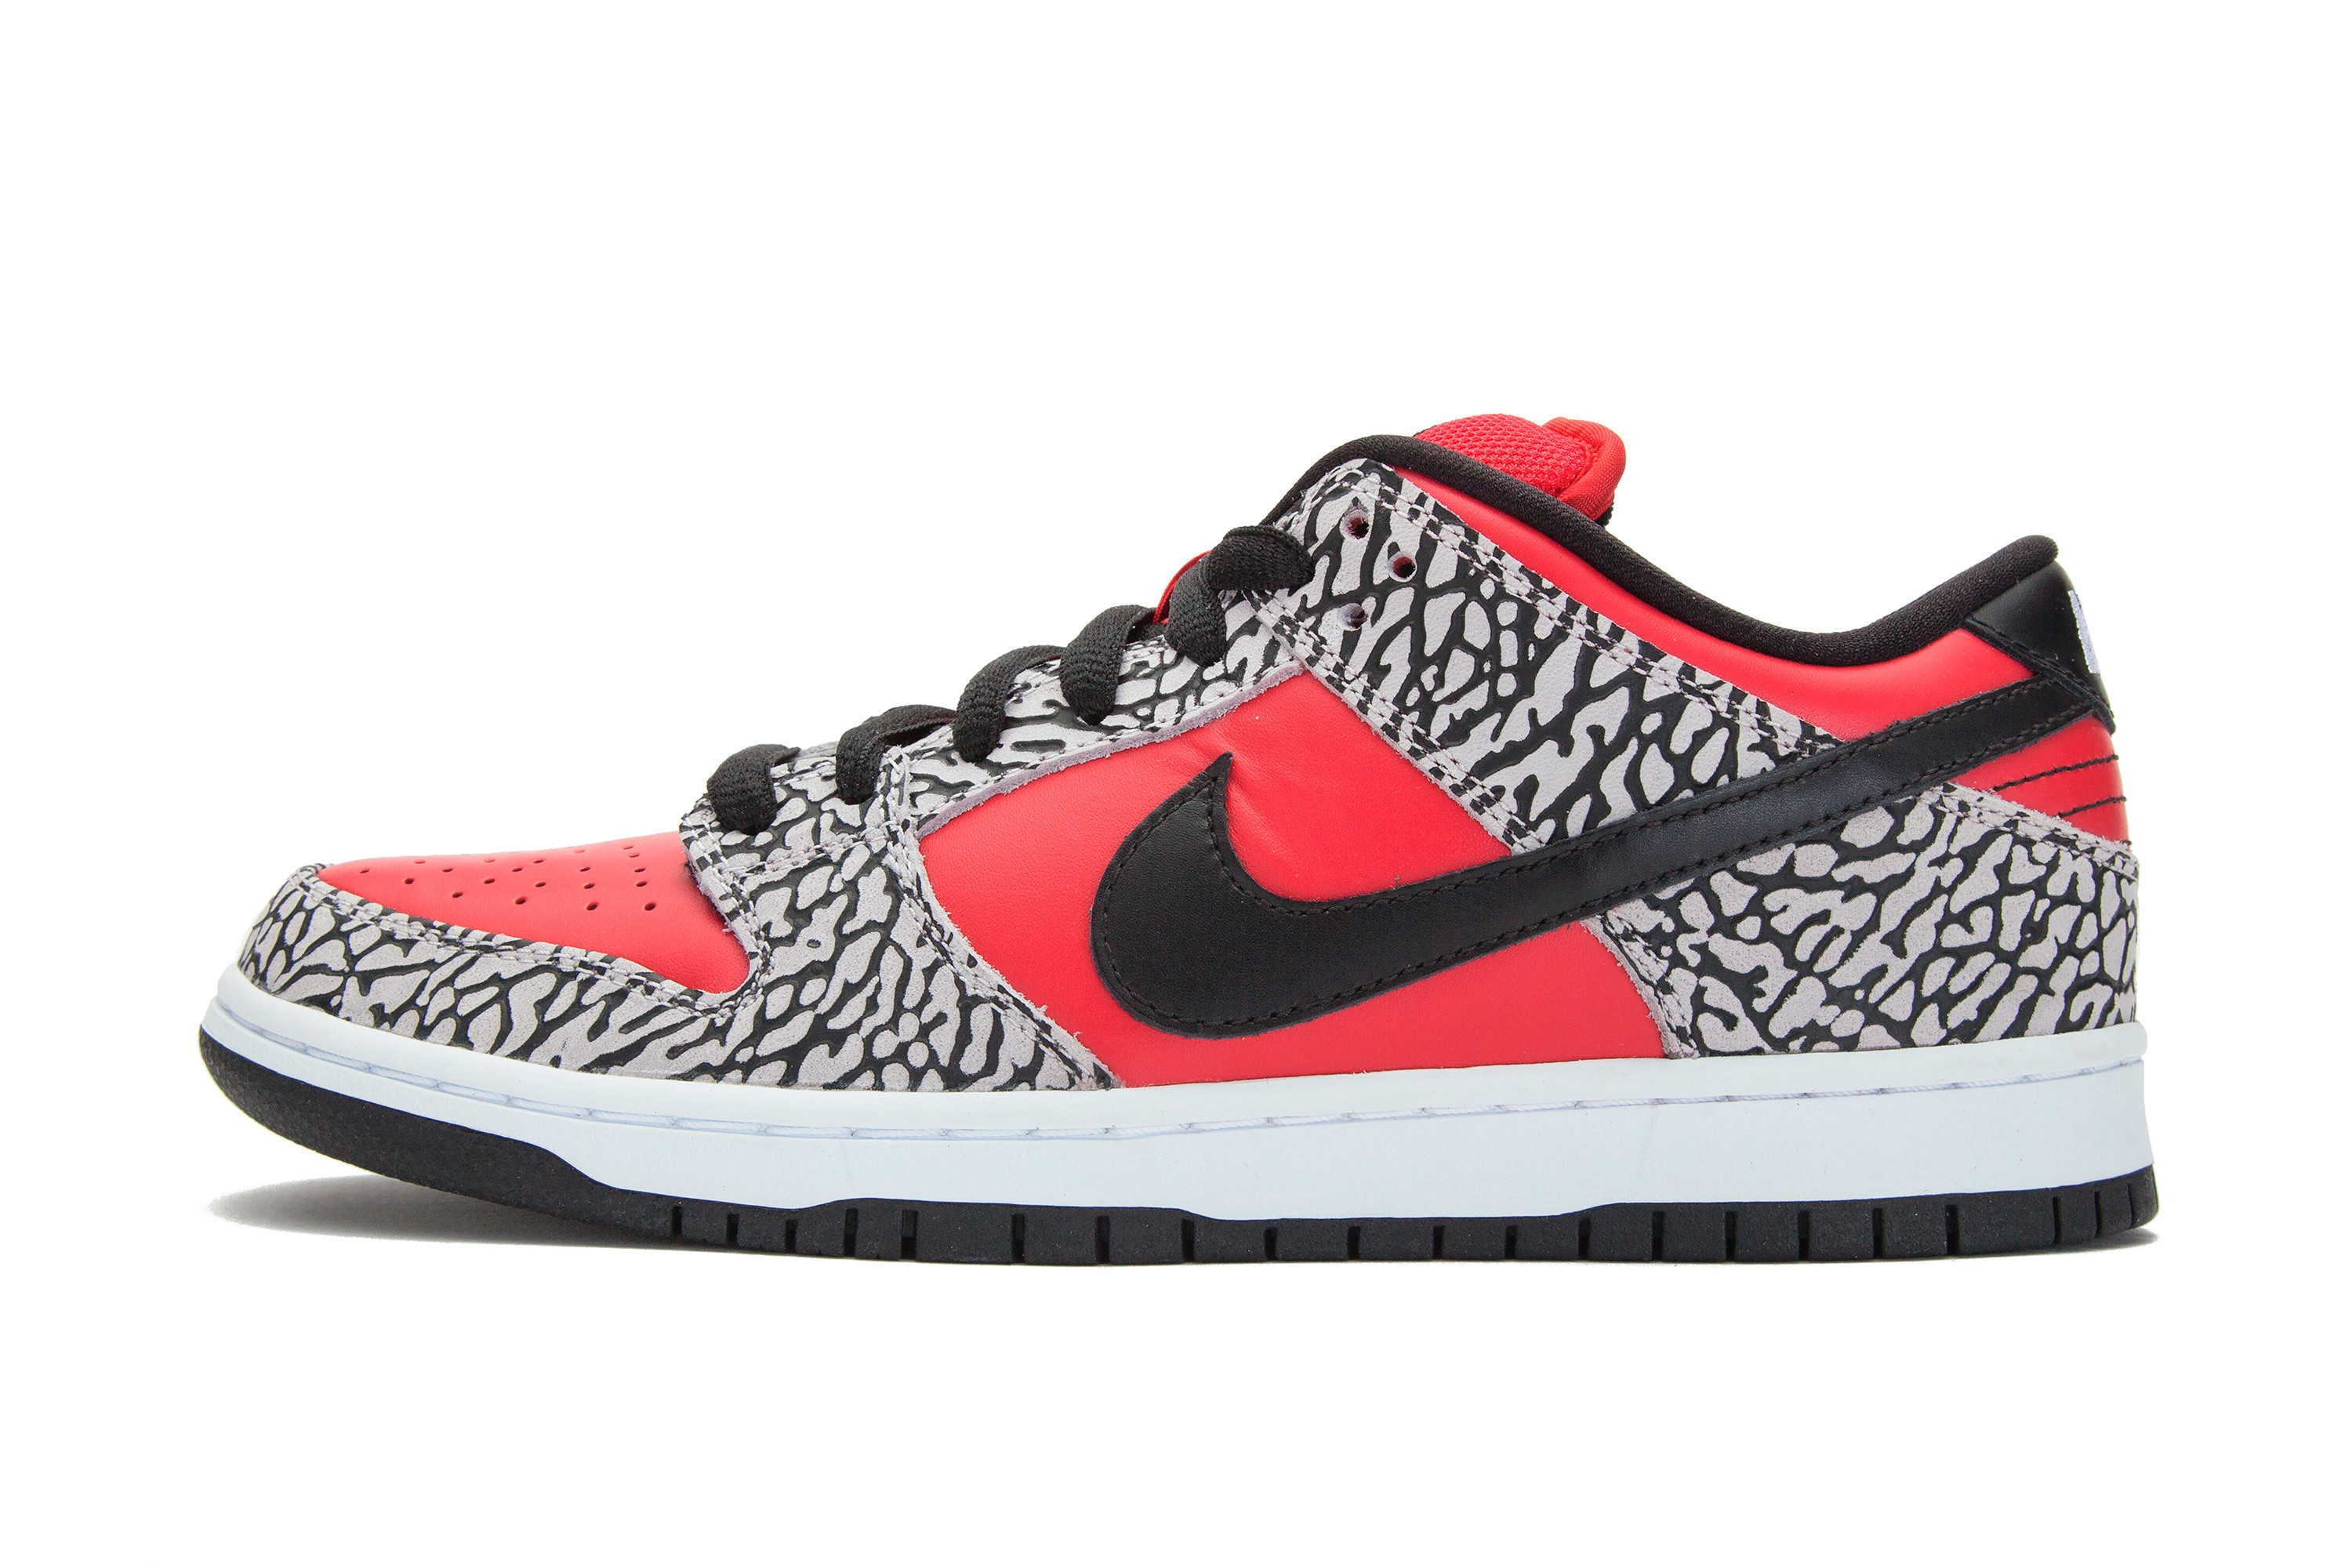 NIKE SB DUNK supreme red cement 27.5